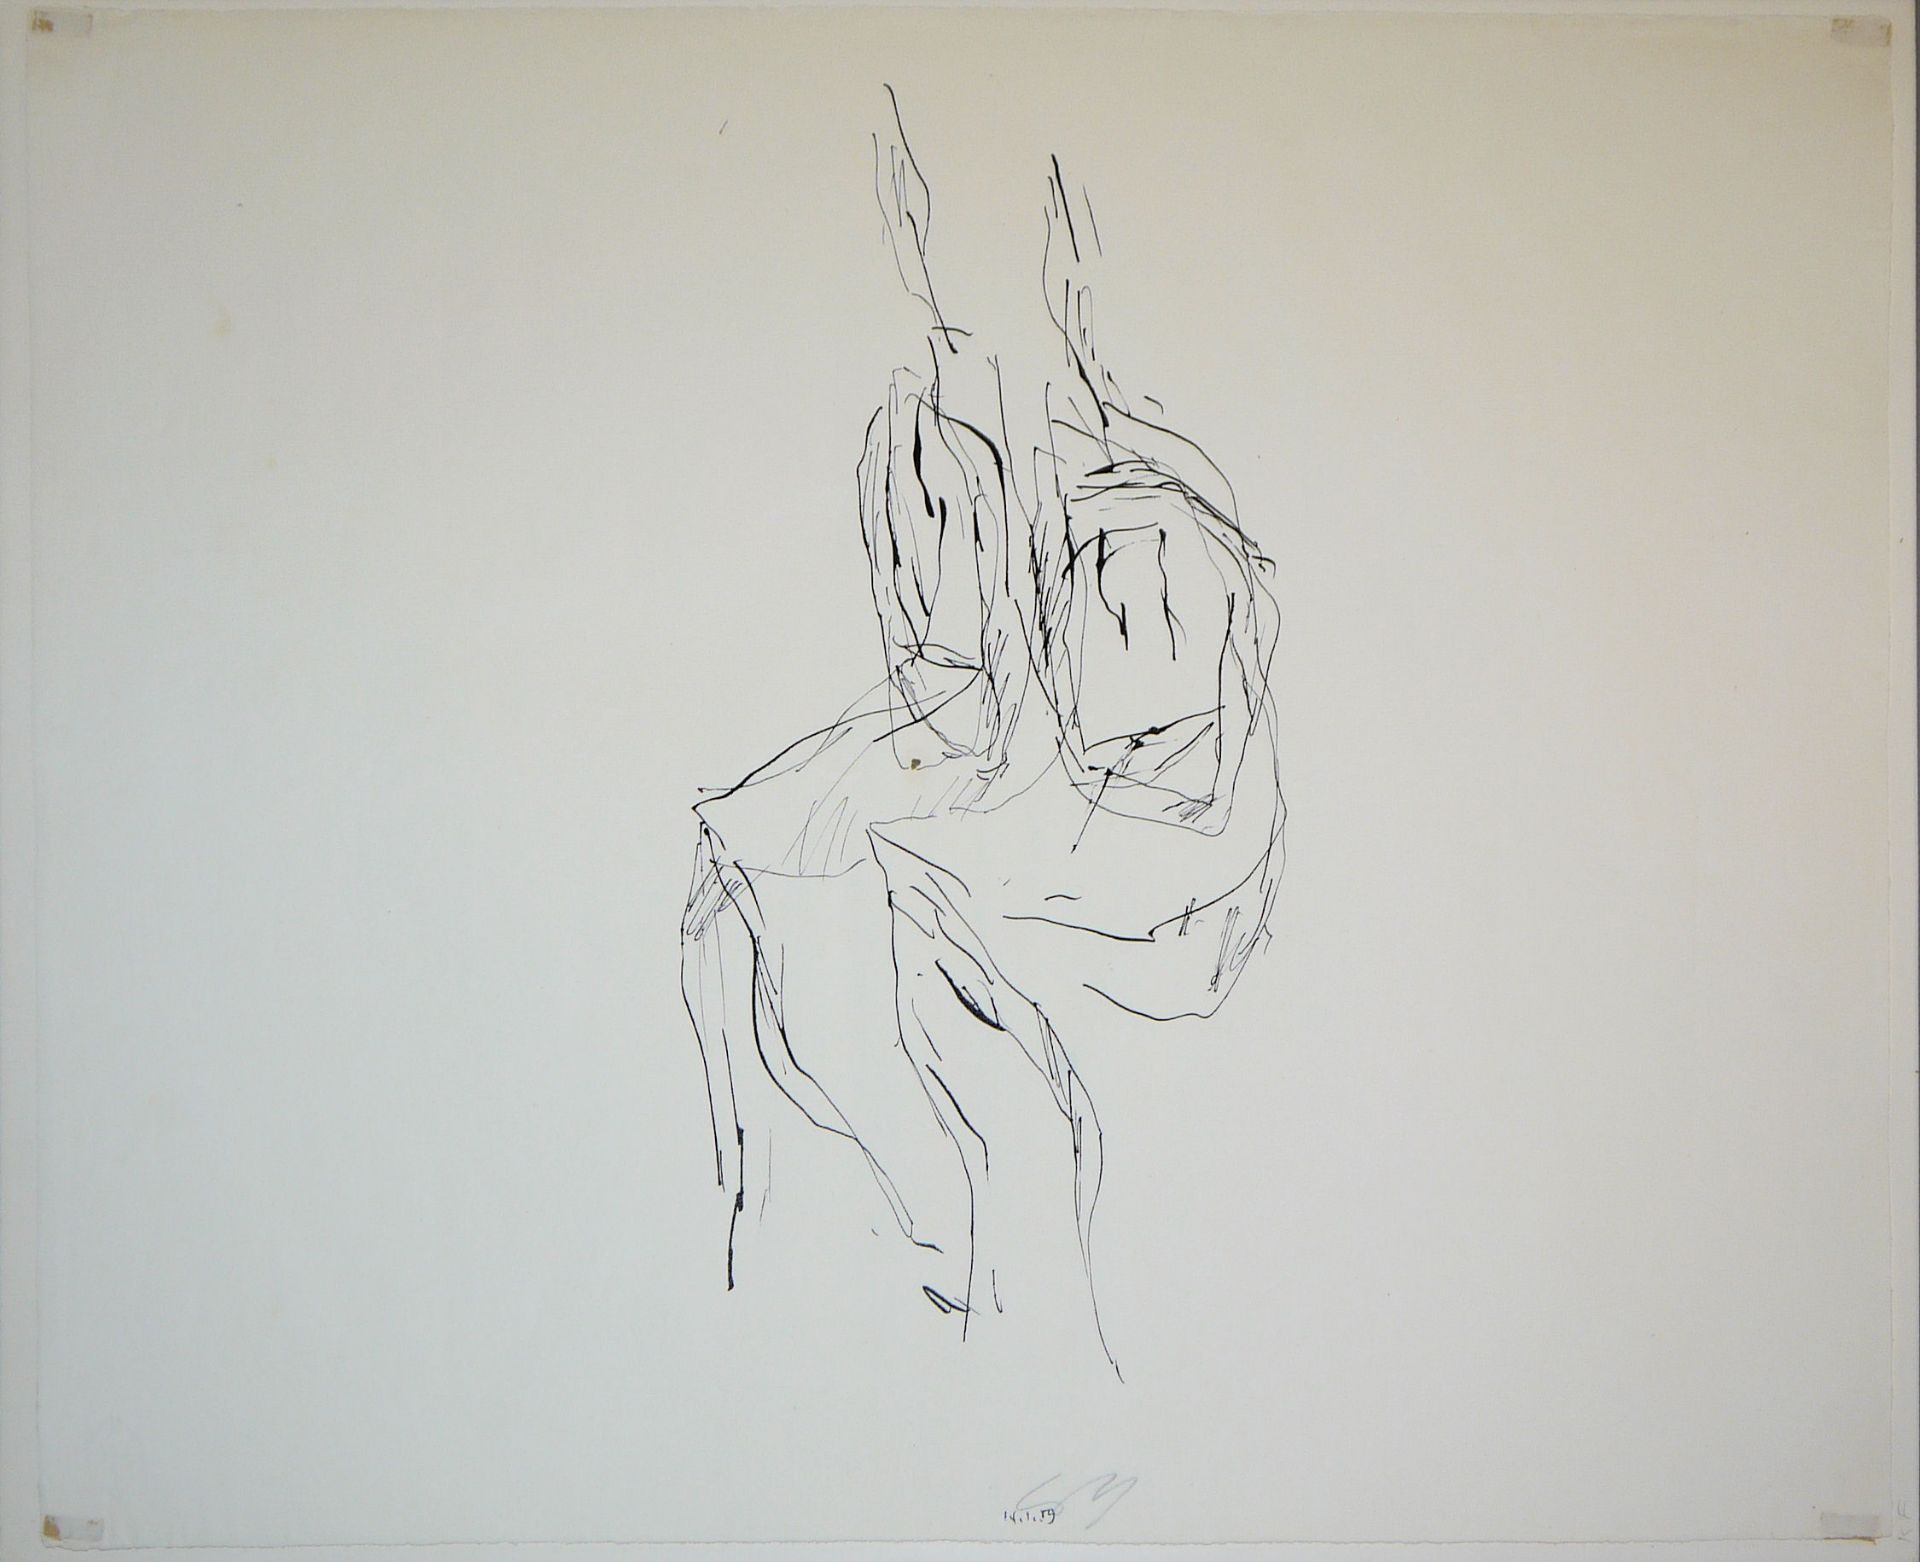 Wilhelm Loth, 2 sitzende & eine Tanzende Frau, two large ink drawings of the "new figuration" from 